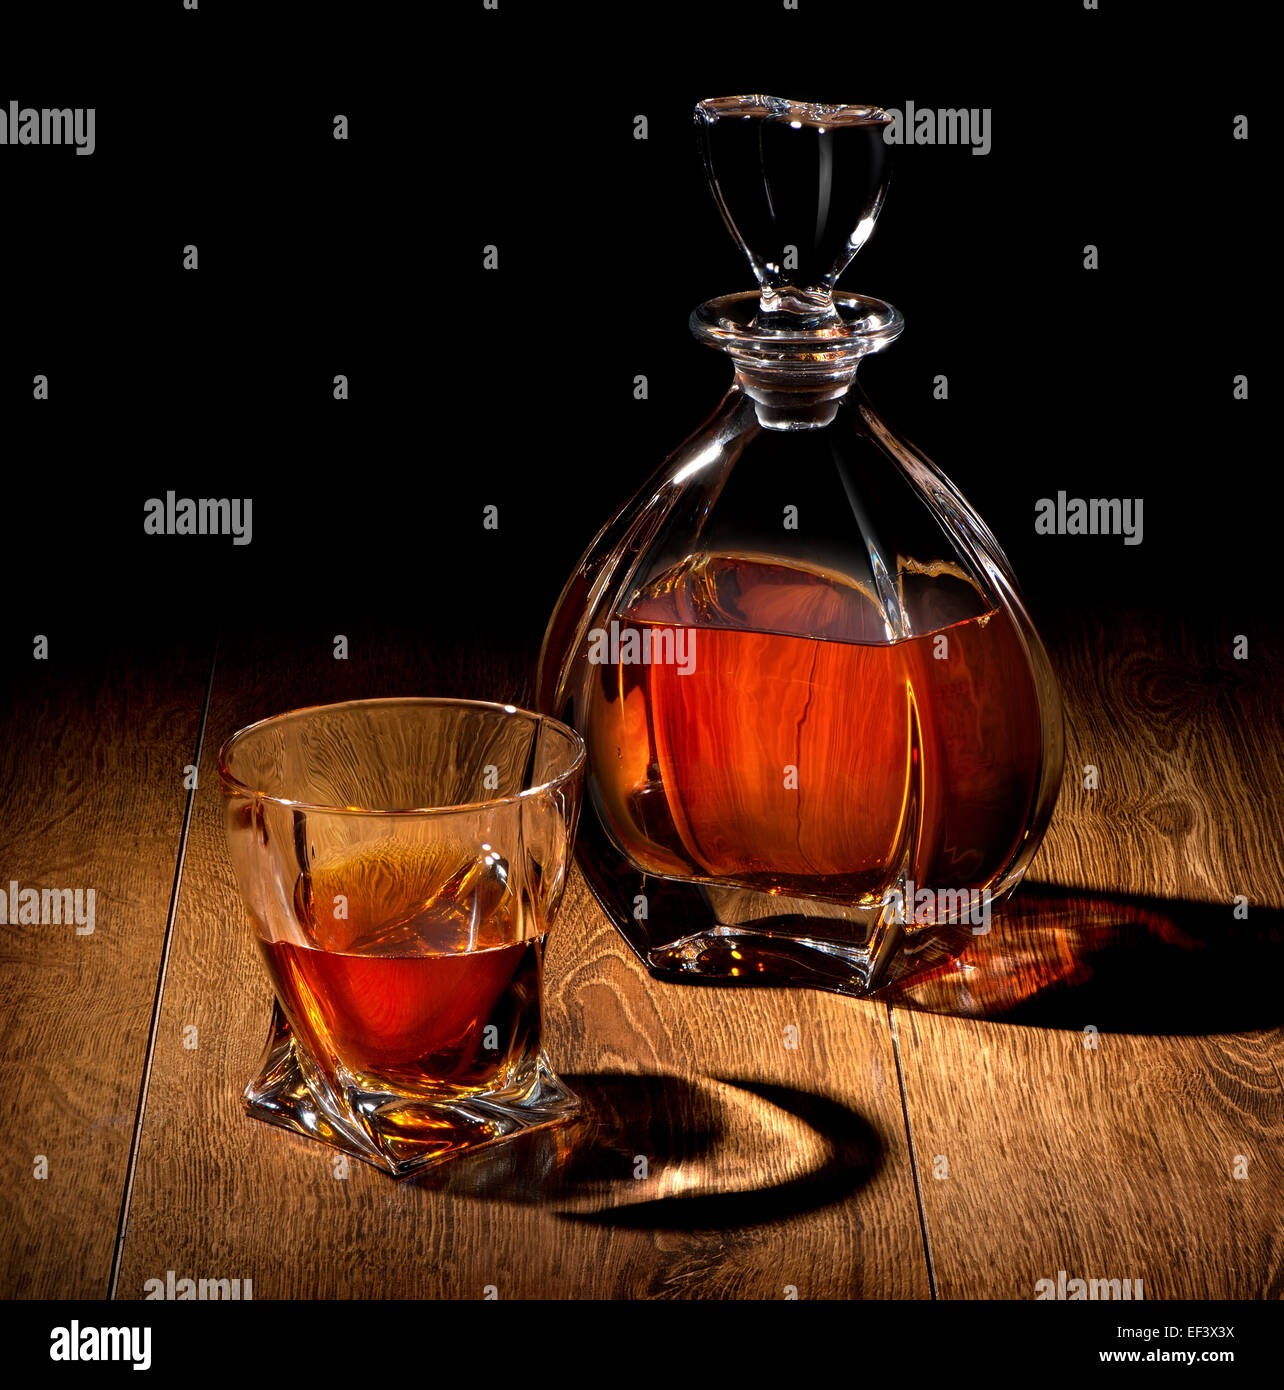 Whiskey on a wooden table on black background Stock Photo